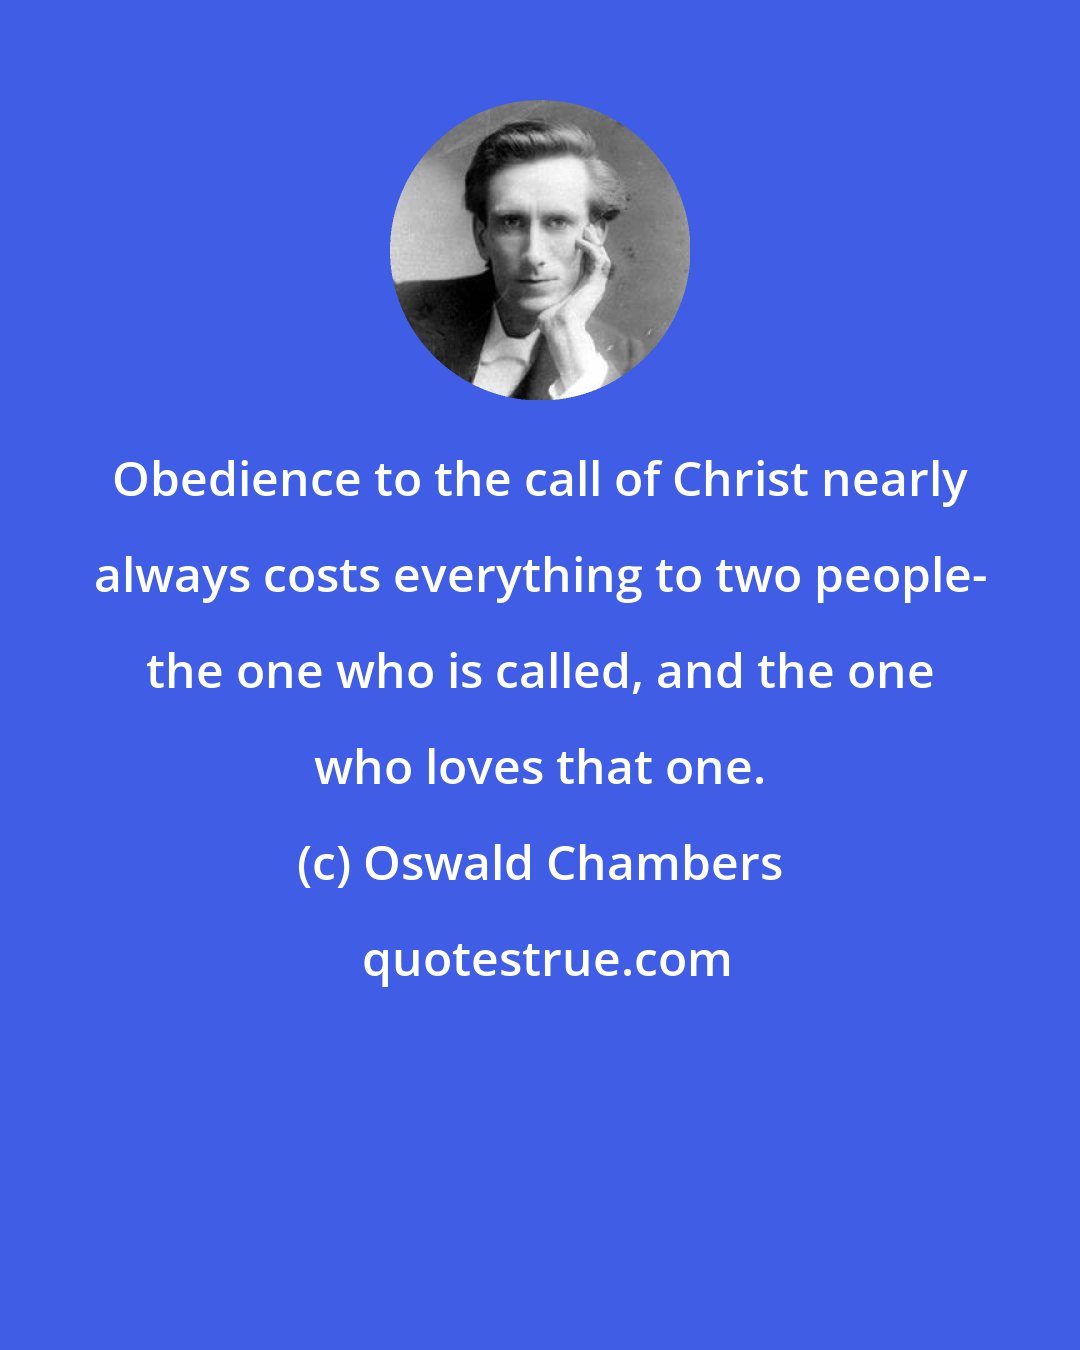 Oswald Chambers: Obedience to the call of Christ nearly always costs everything to two people- the one who is called, and the one who loves that one.